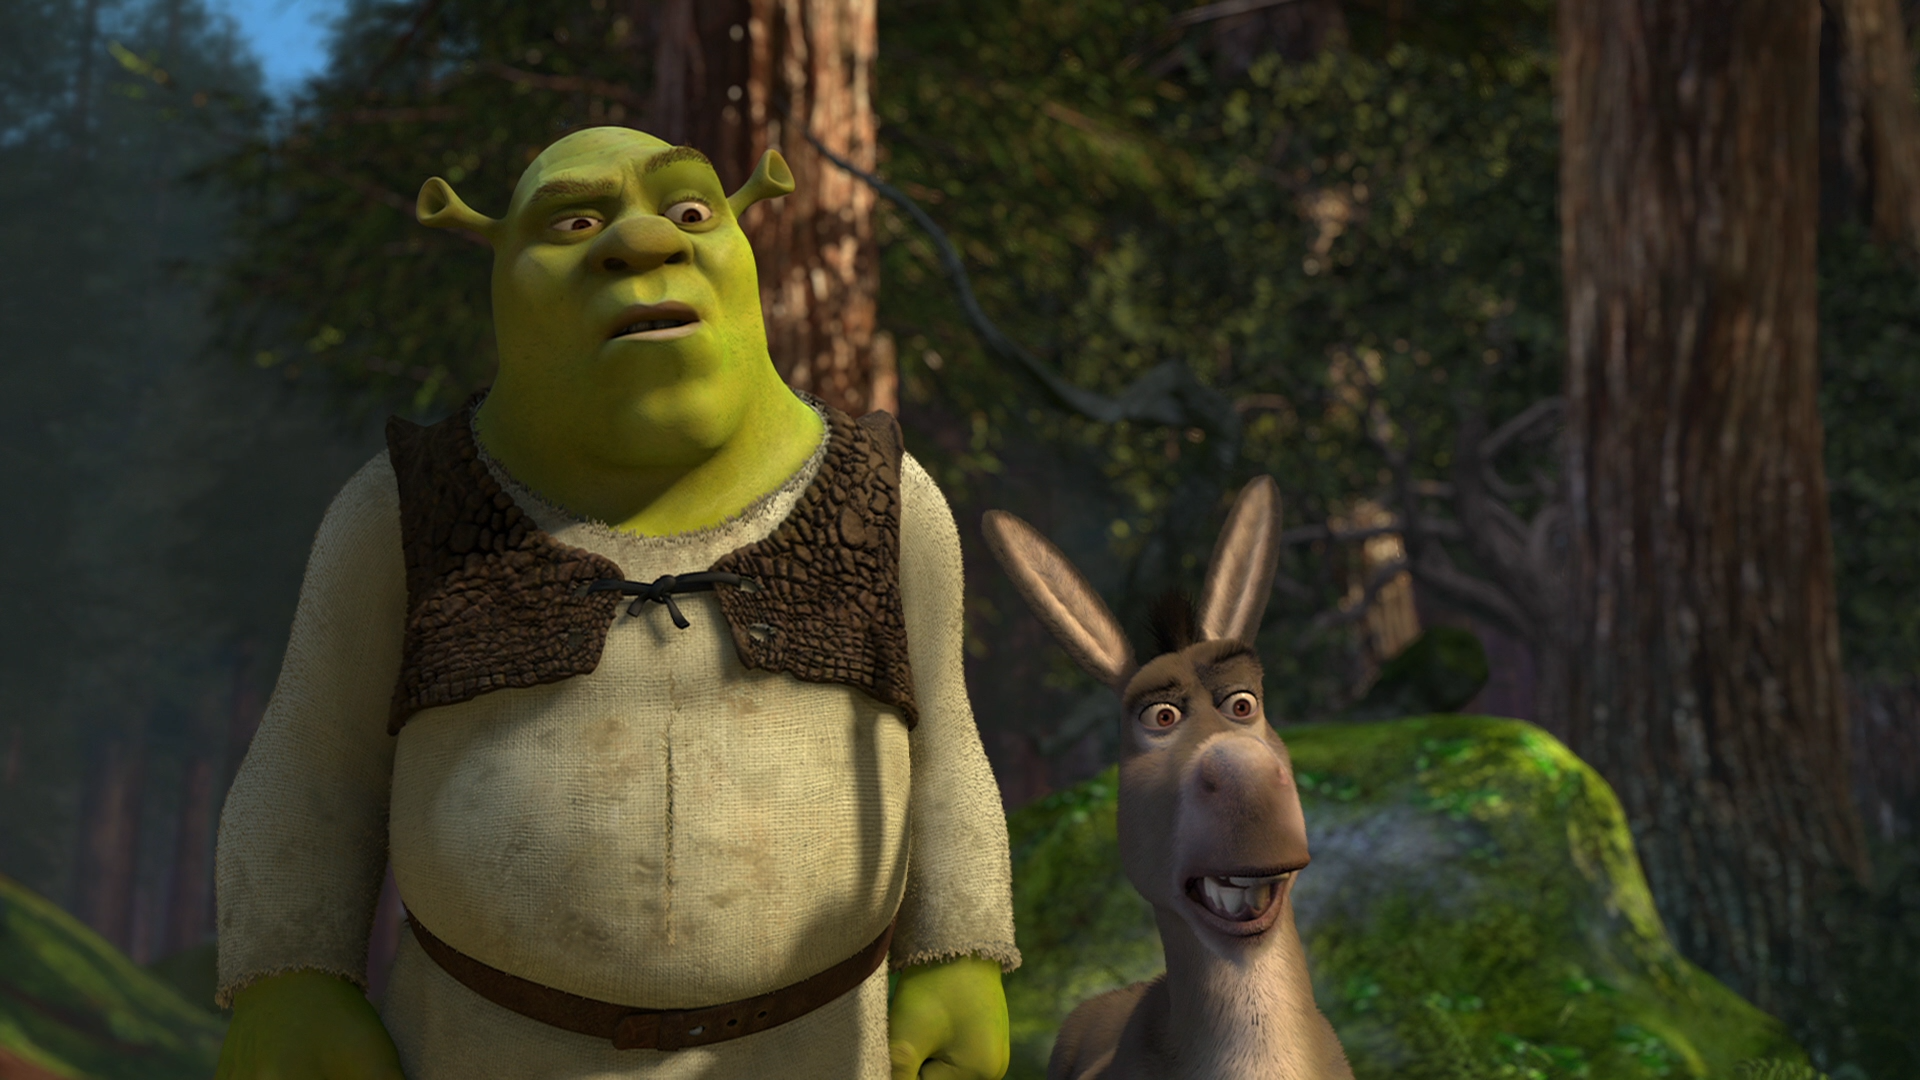 Shrek 5 Release Date Pegged For 2019 Collider.